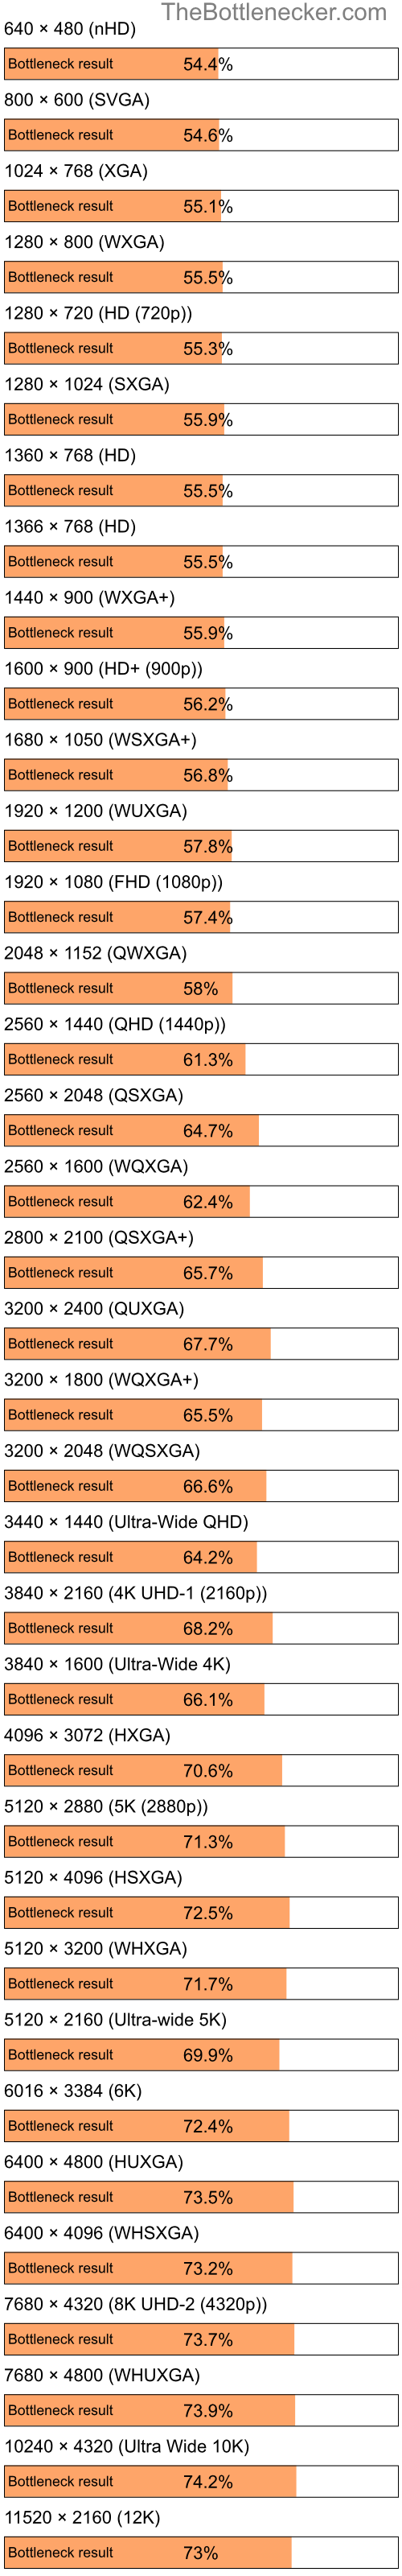 Bottleneck results by resolution for Intel Celeron M and AMD Mobility Radeon HD 3450 in Processor Intense Tasks